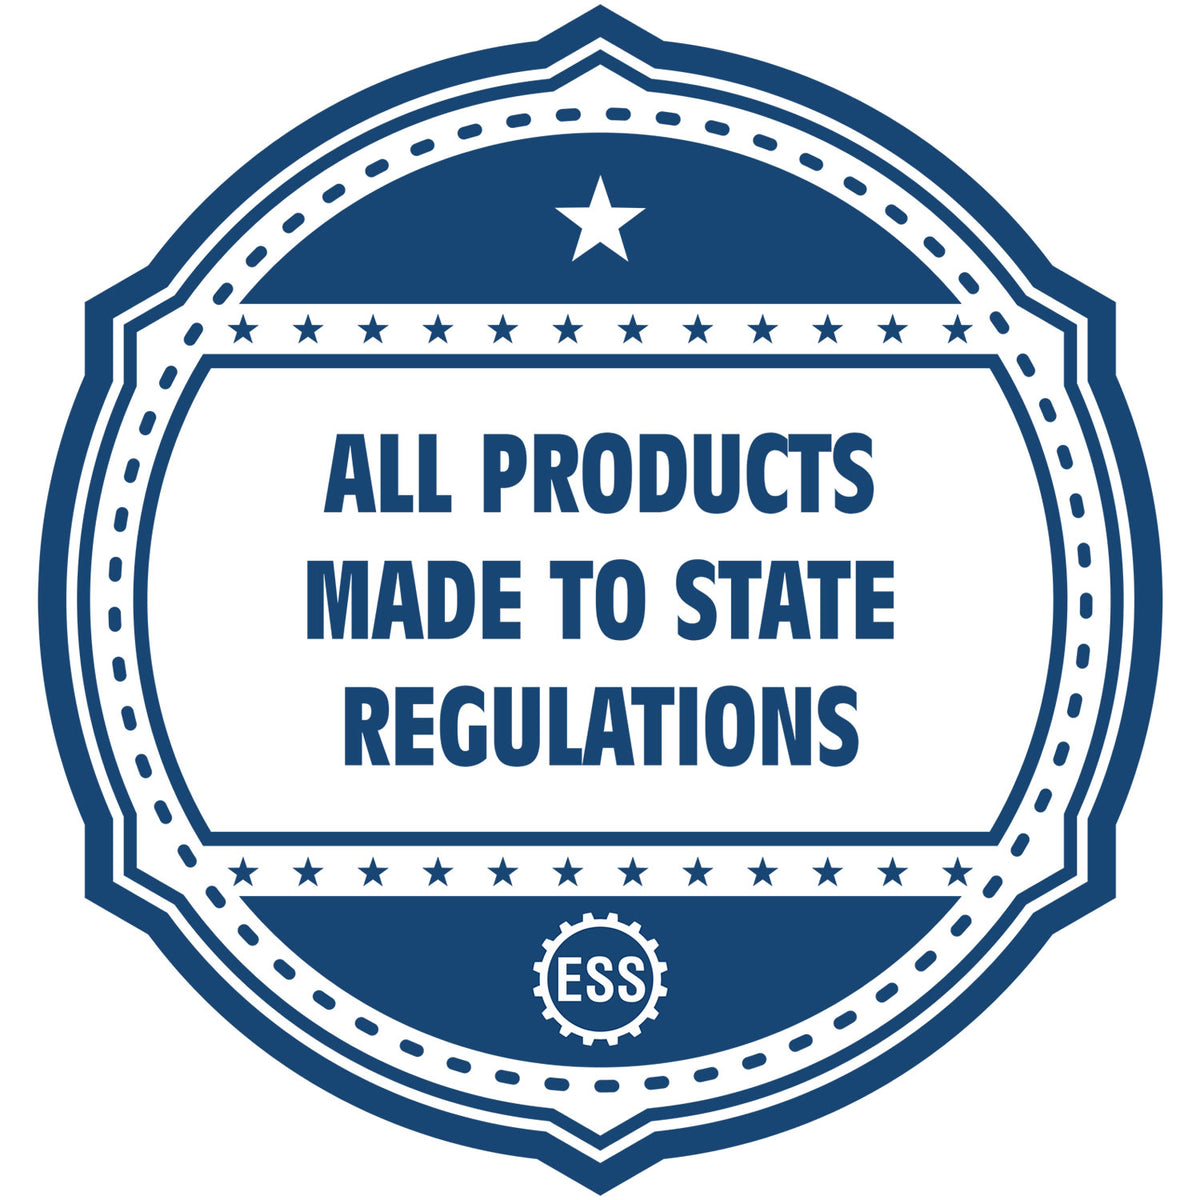 An icon or badge element for the Self-Inking State Seal Michigan Notary Stamp showing that this product is made in compliance with state regulations.